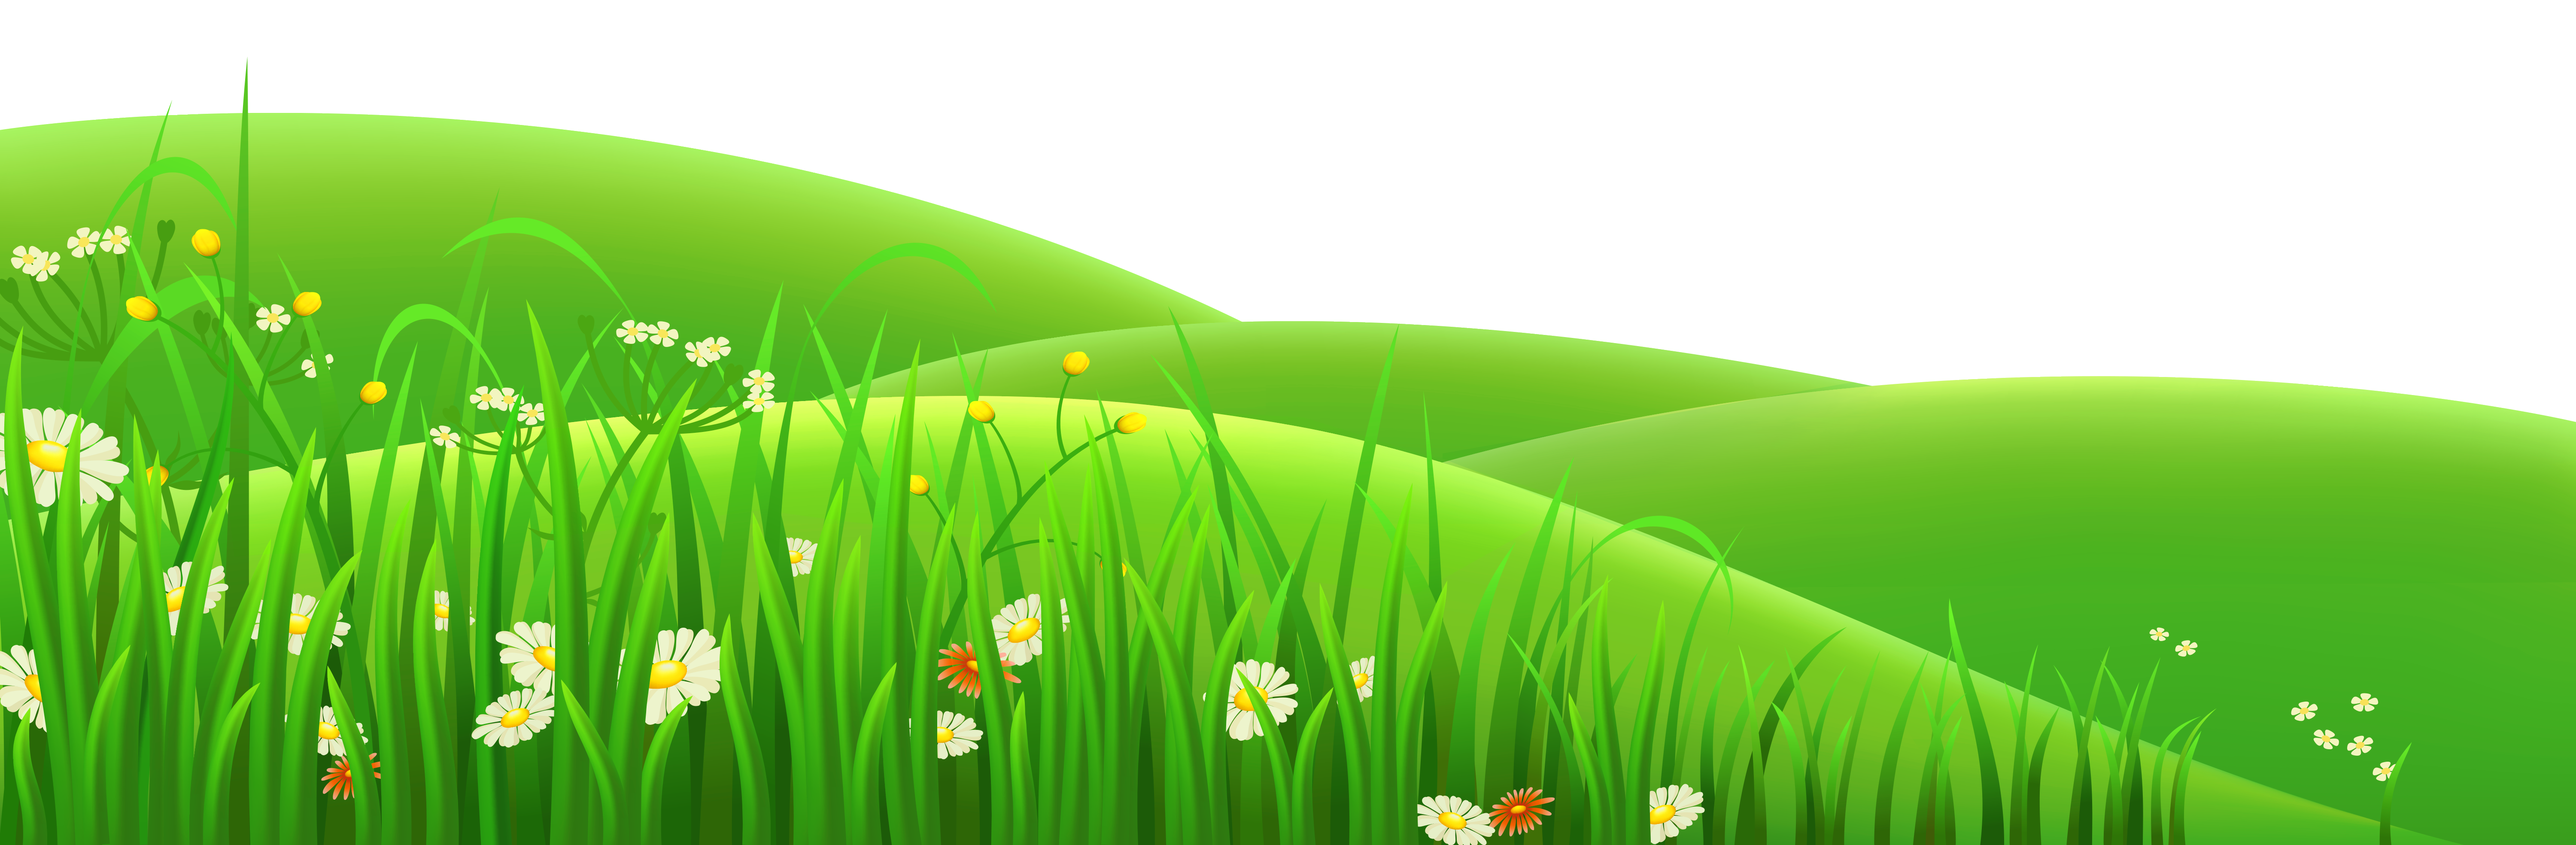 Free Flower Grass Cliparts, Download Free Clip Art, Free ...